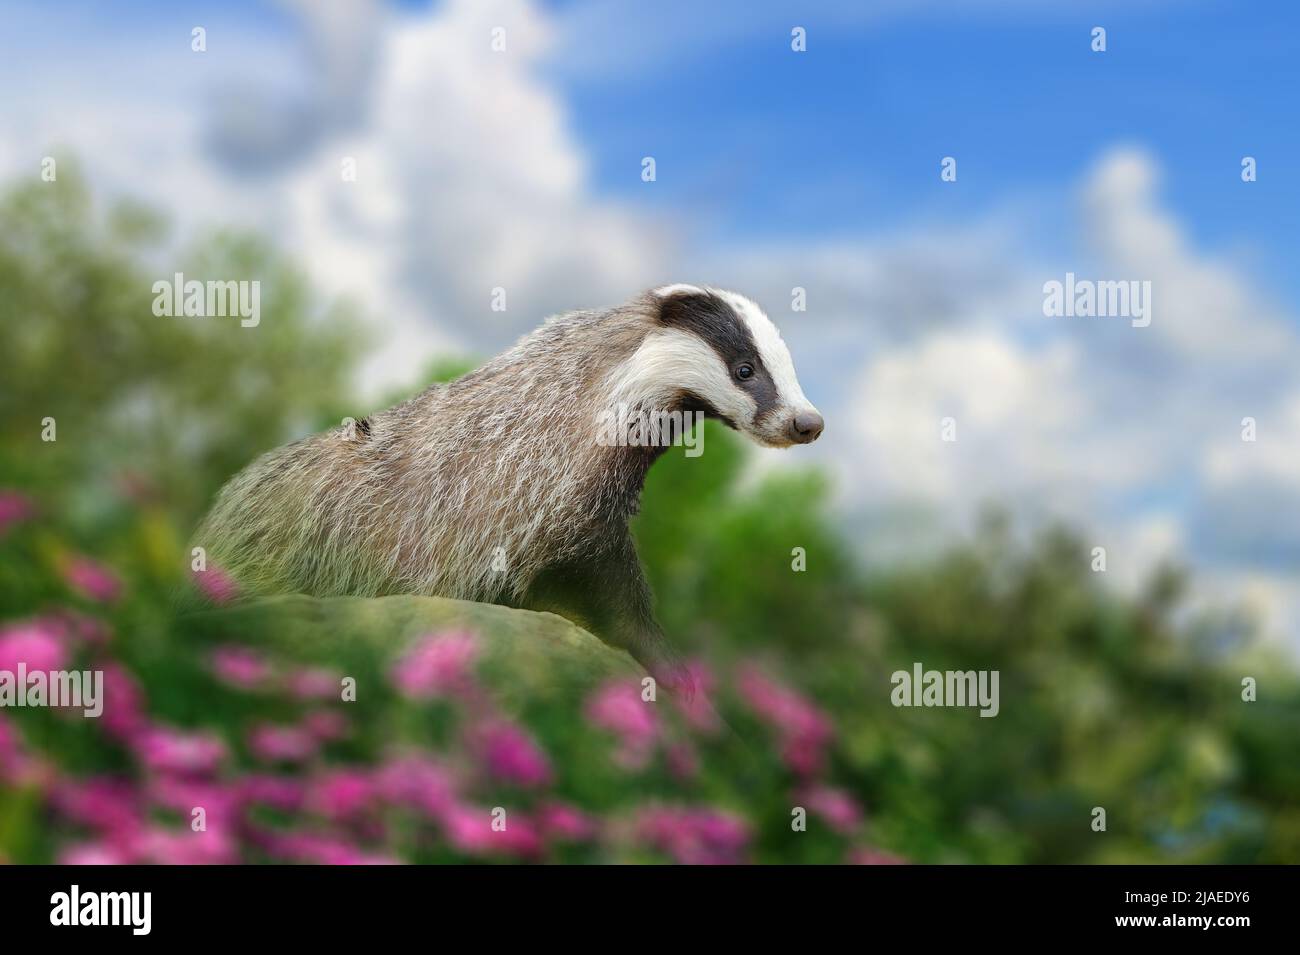 Badger near its burrow in the meadow on stone with flowers Stock Photo